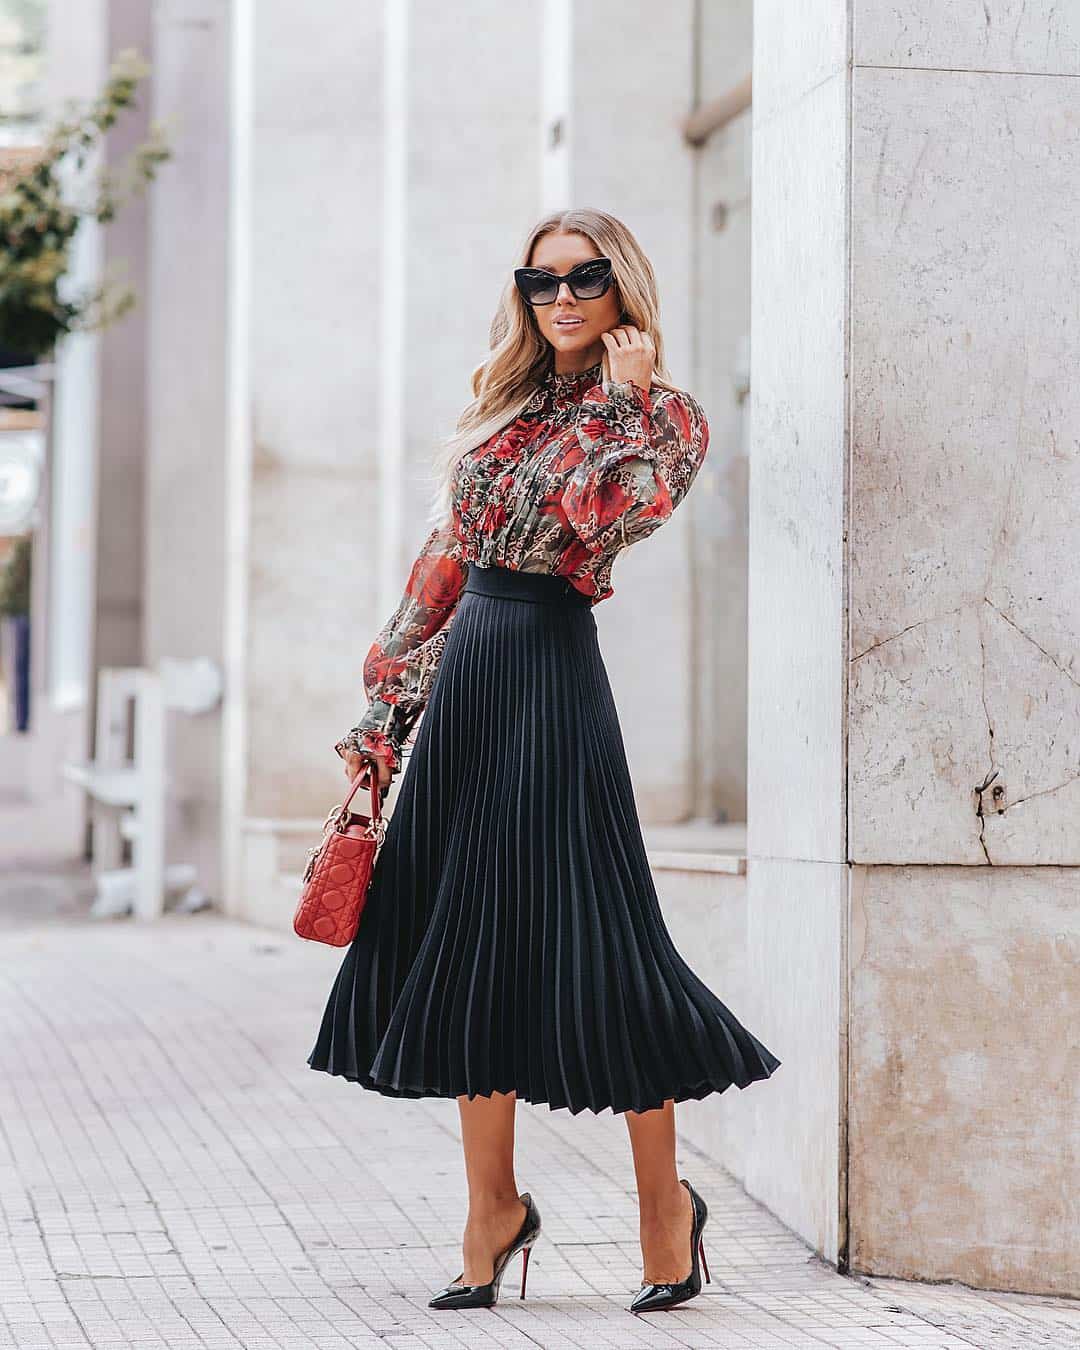 Bianca Petry’s Exquisite Street Style to Copy Today – SORTRA